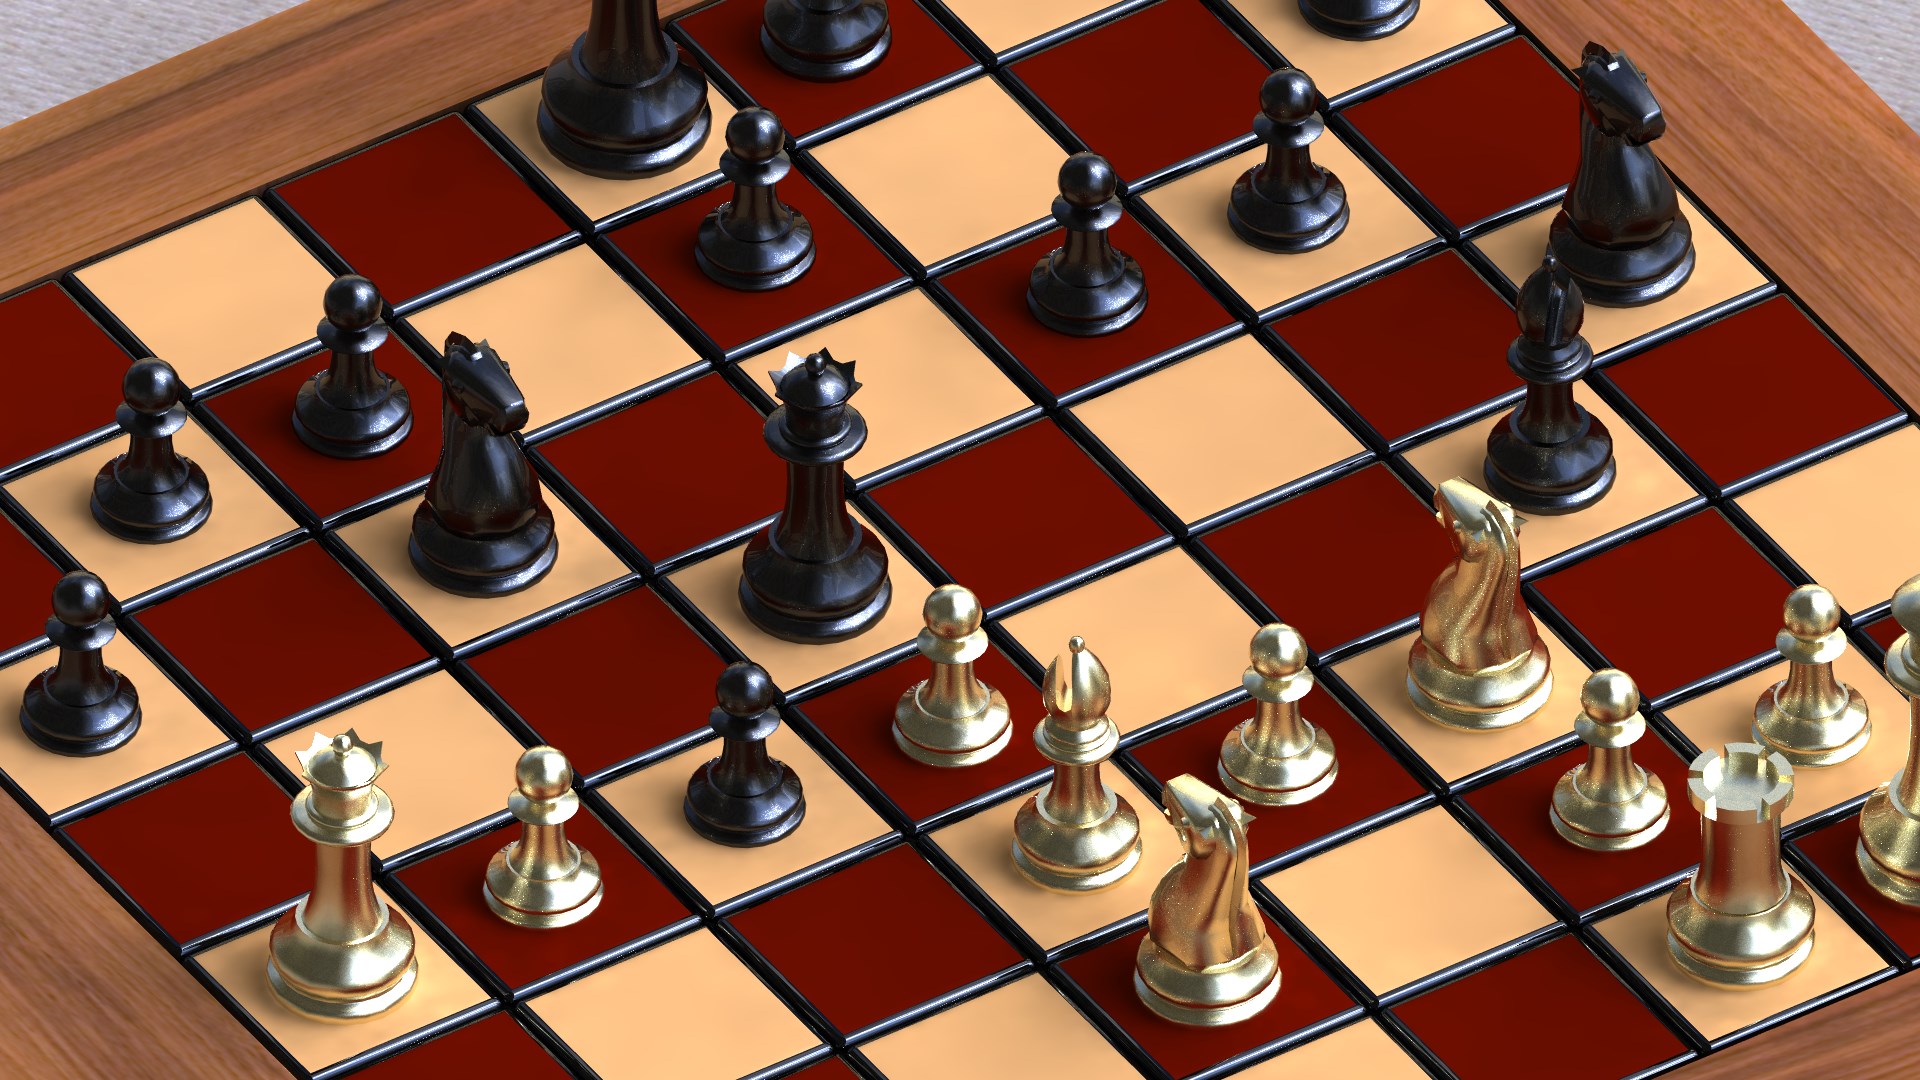 Best Free Chess Games for Windows 10 